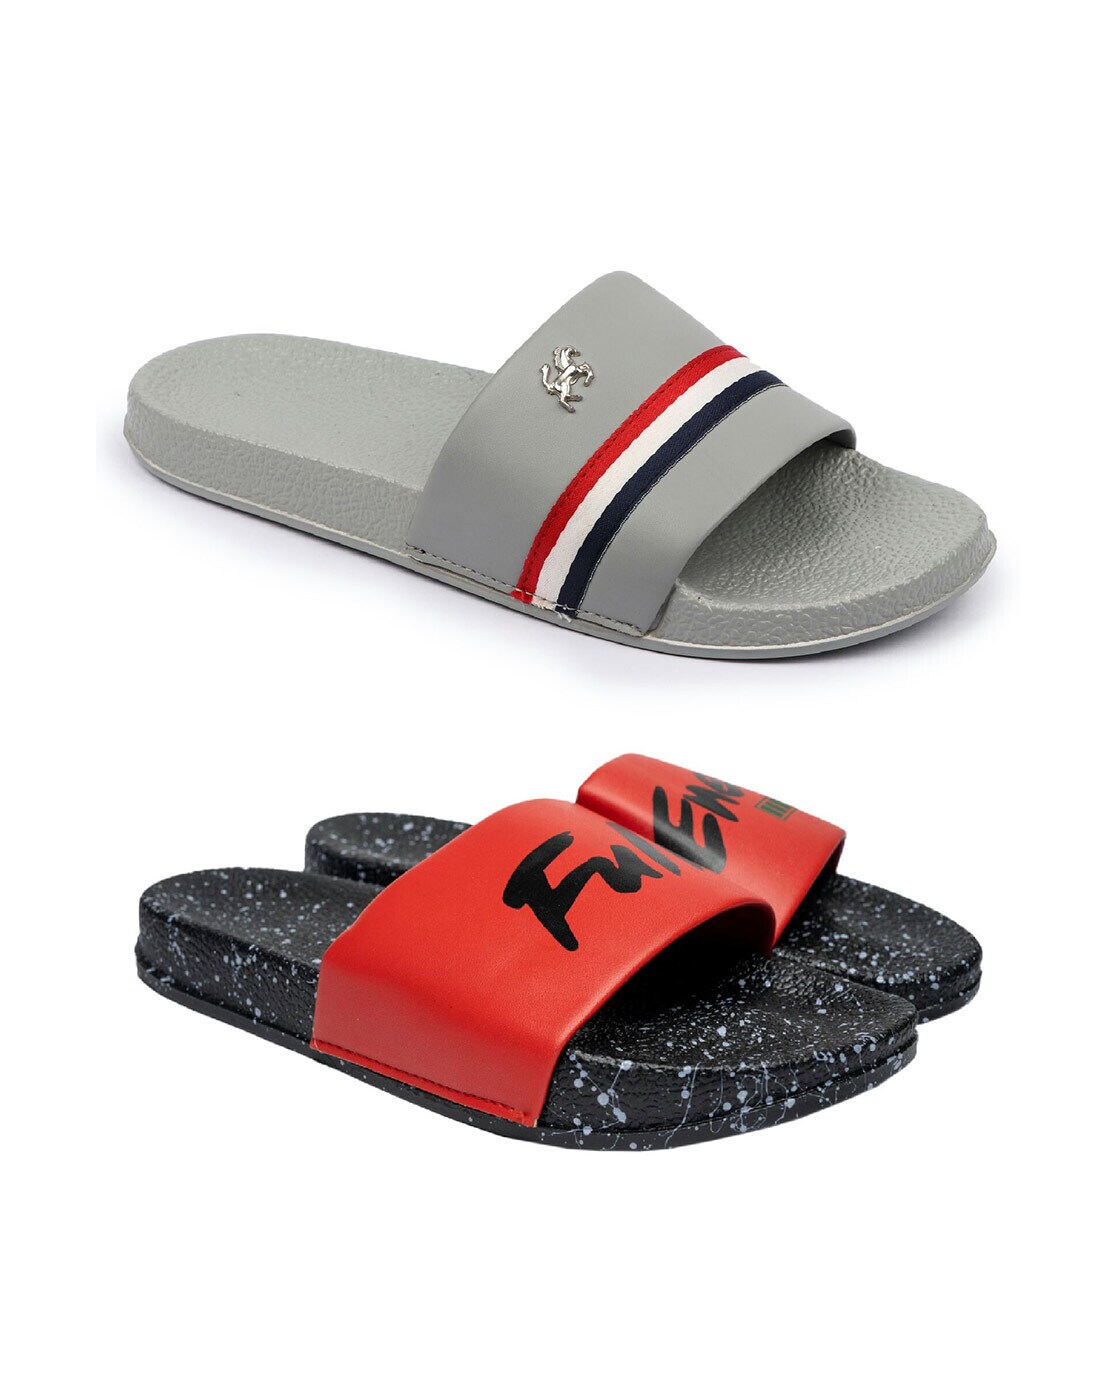 Silicon Strap Thong Flip Flops Slides for Mens and Boys